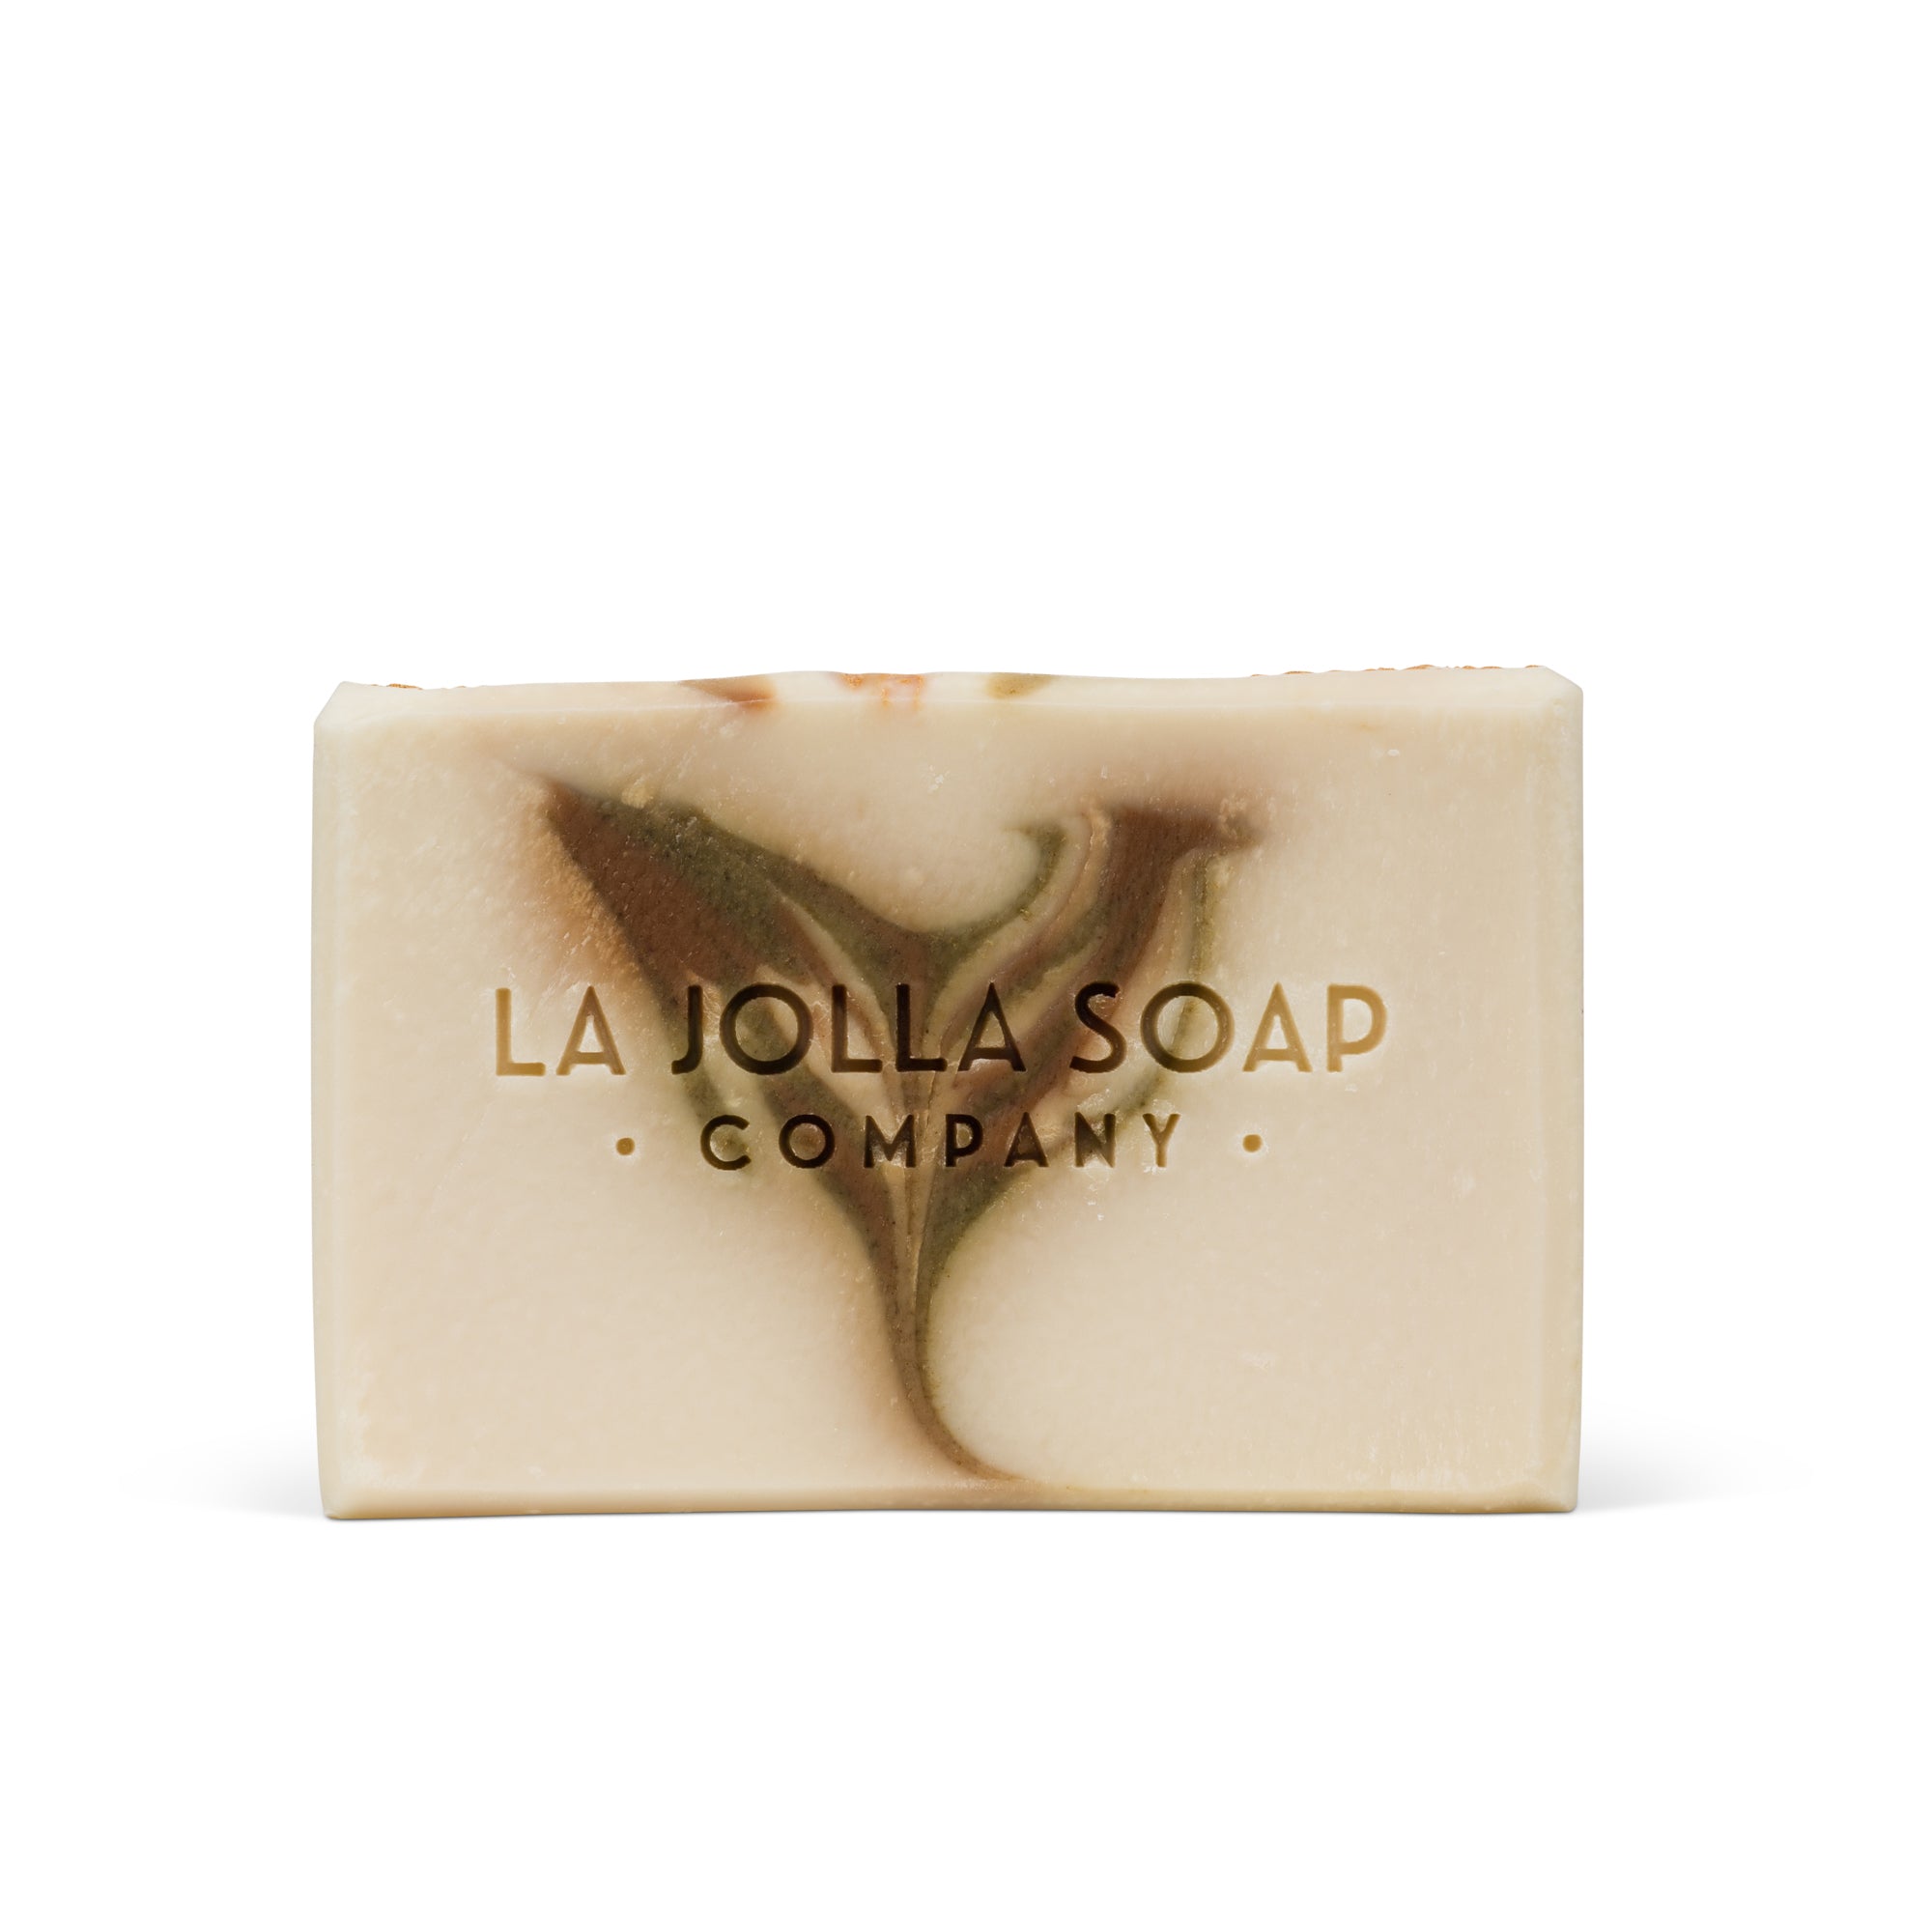 Sea Salt Soap Bar - White with a brown and green swirl that is shaped like a heart. La jolla Soap Company